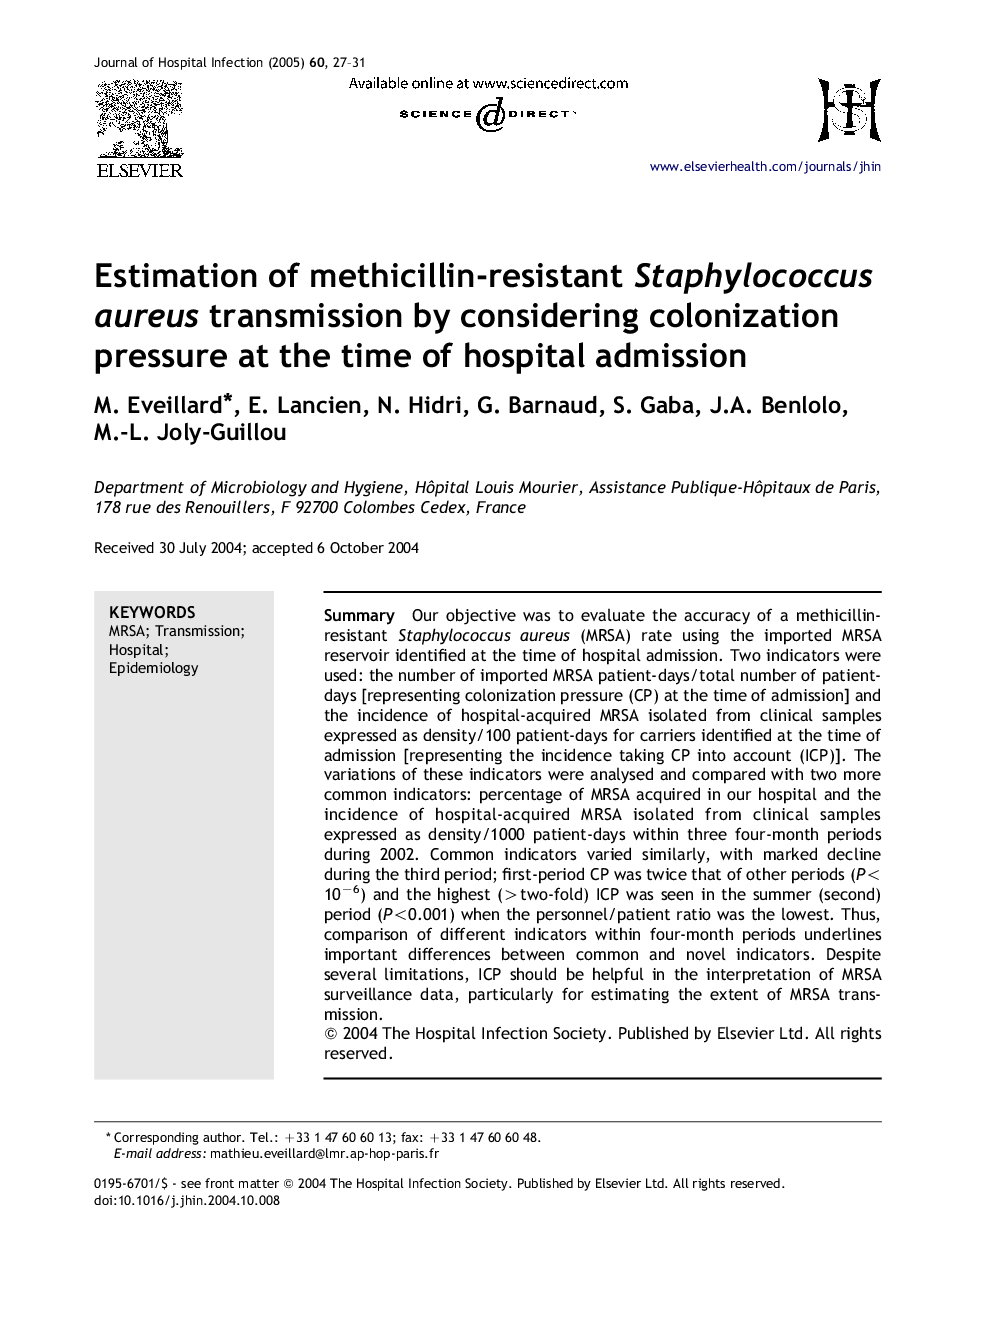 Estimation of methicillin-resistant Staphylococcus aureus transmission by considering colonization pressure at the time of hospital admission